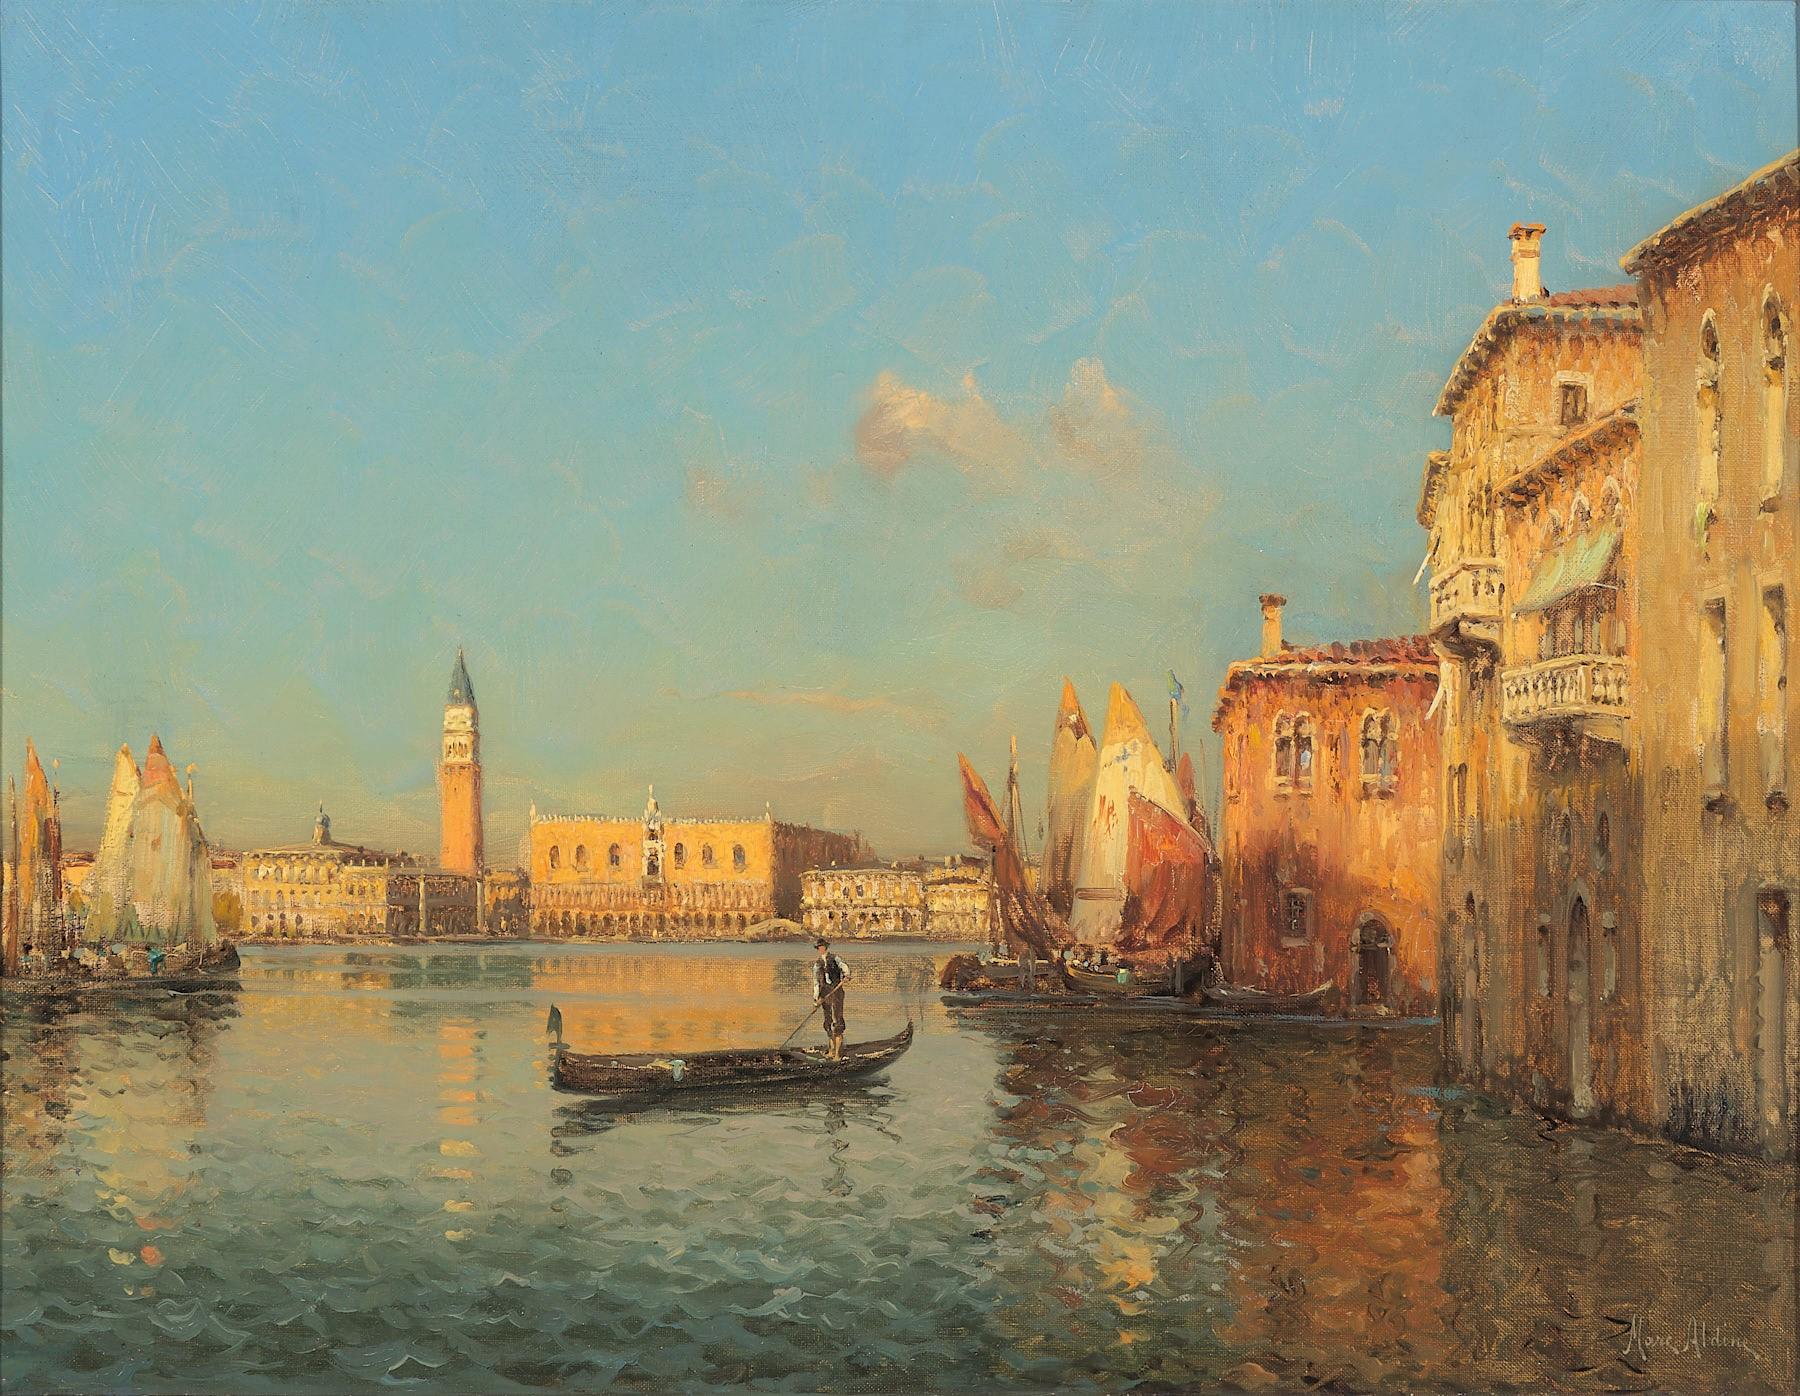 Marc Aldine, a pseudonym of Antoine Bouvard Senior, is probably one of the most popular and prolific painters of Venetian scenes of the early 20th century.

From the late 19th century travel abroad to visit the sights of Europe was gaining